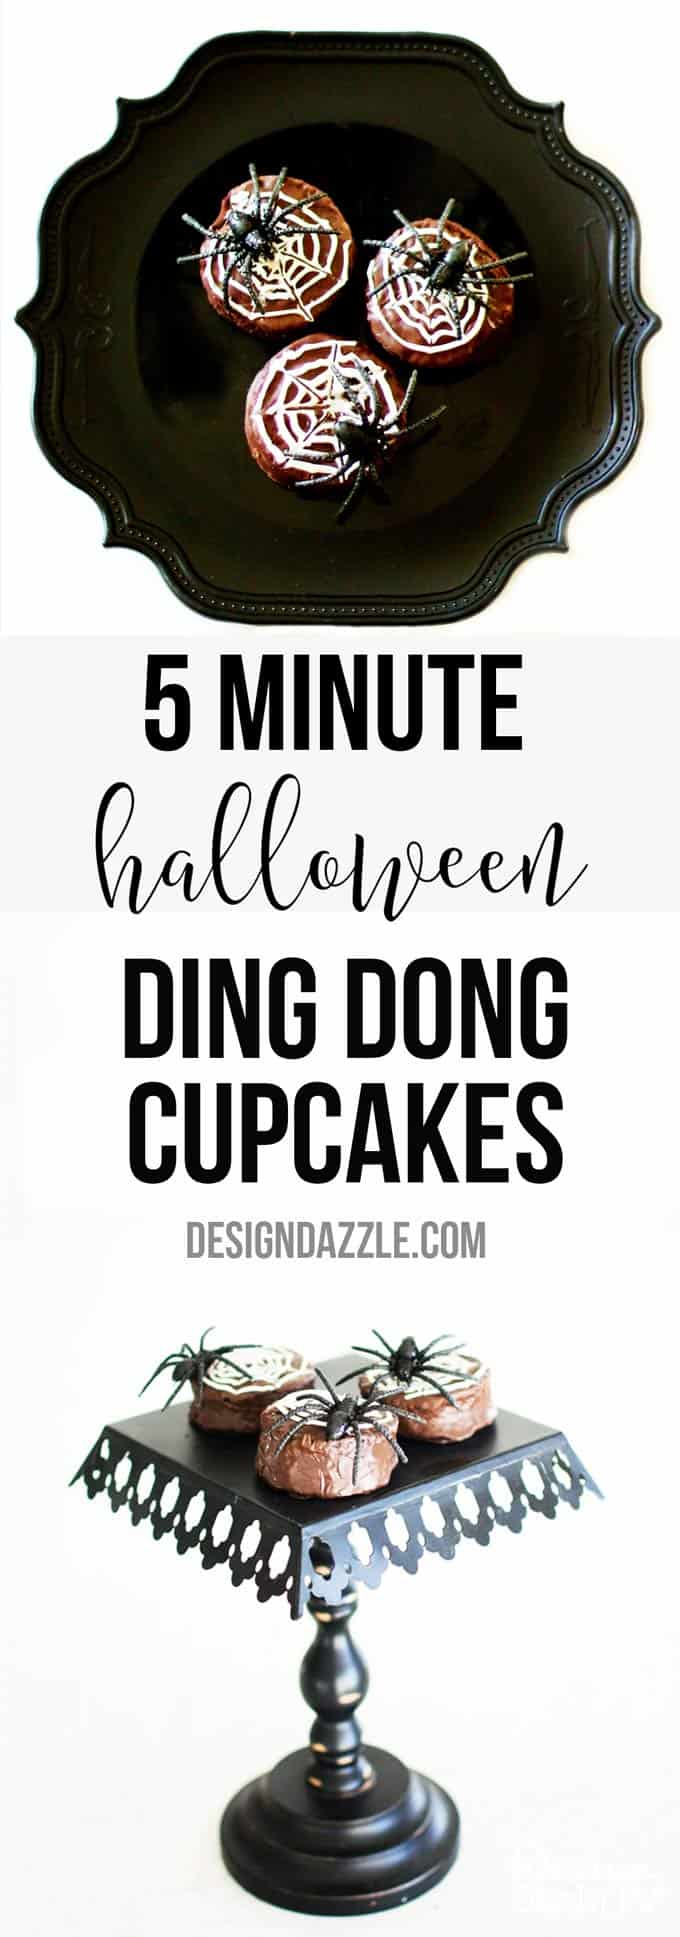 All you need are Ding Dong Cupcakes, white frosting, and a toothpick to create these Halloween cupcakes in under 5 minutes! | halloween dessert recipes | easy halloween treats | dessert recipes for halloween | simple halloween treat ideas || Design Dazzle 